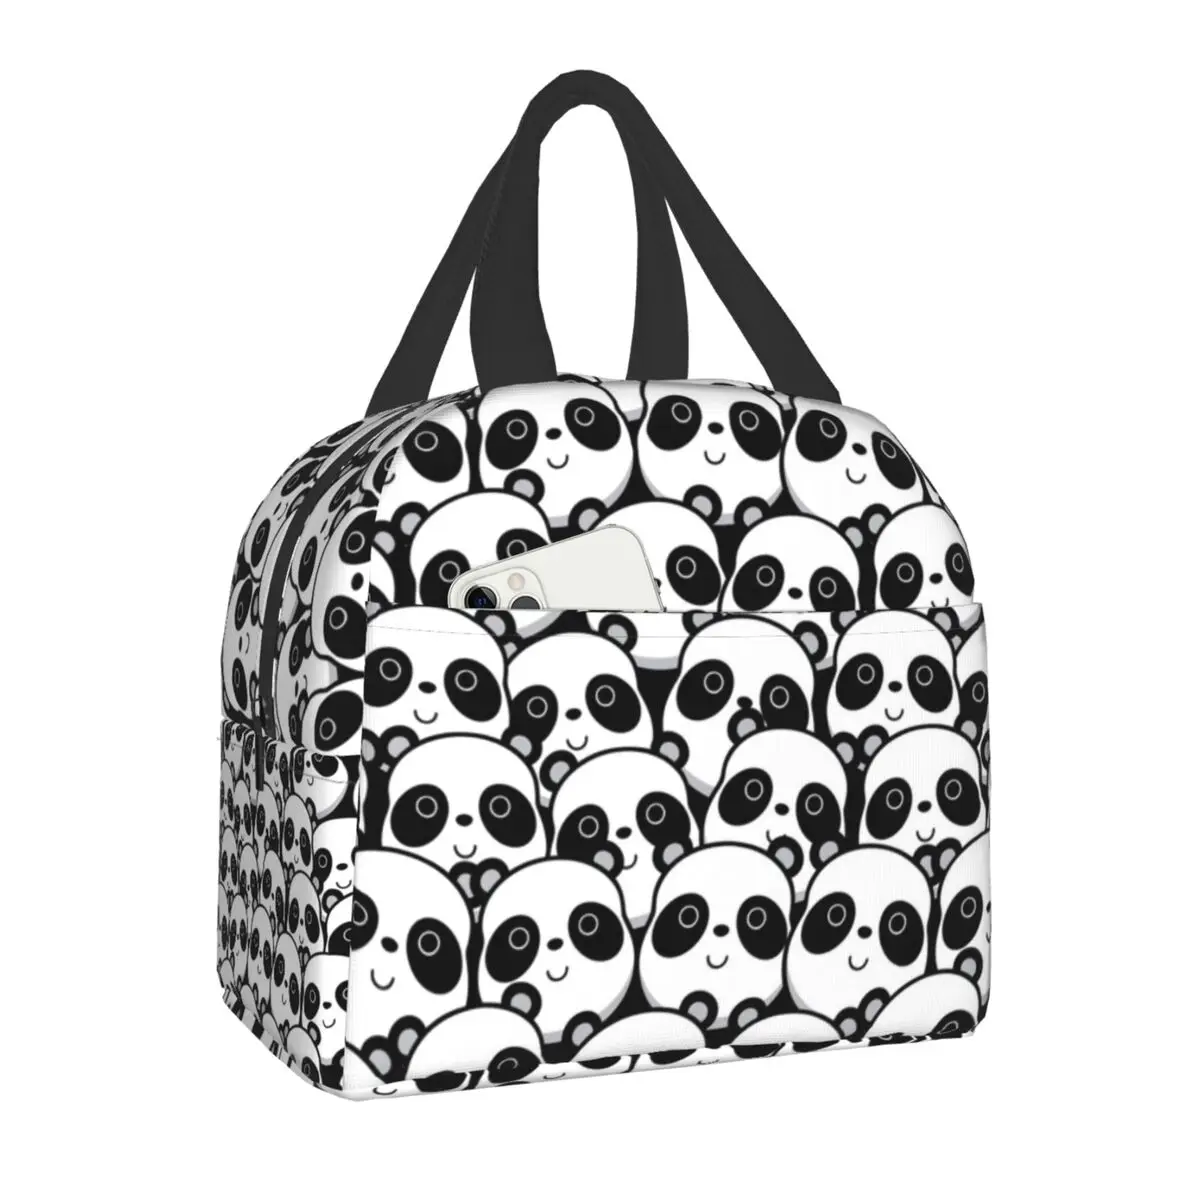 Cartoon Panda Bear Thermal Insulated Lunch Bag Women Portable Cooler Warm Lunch Tote for School Storage Food Box